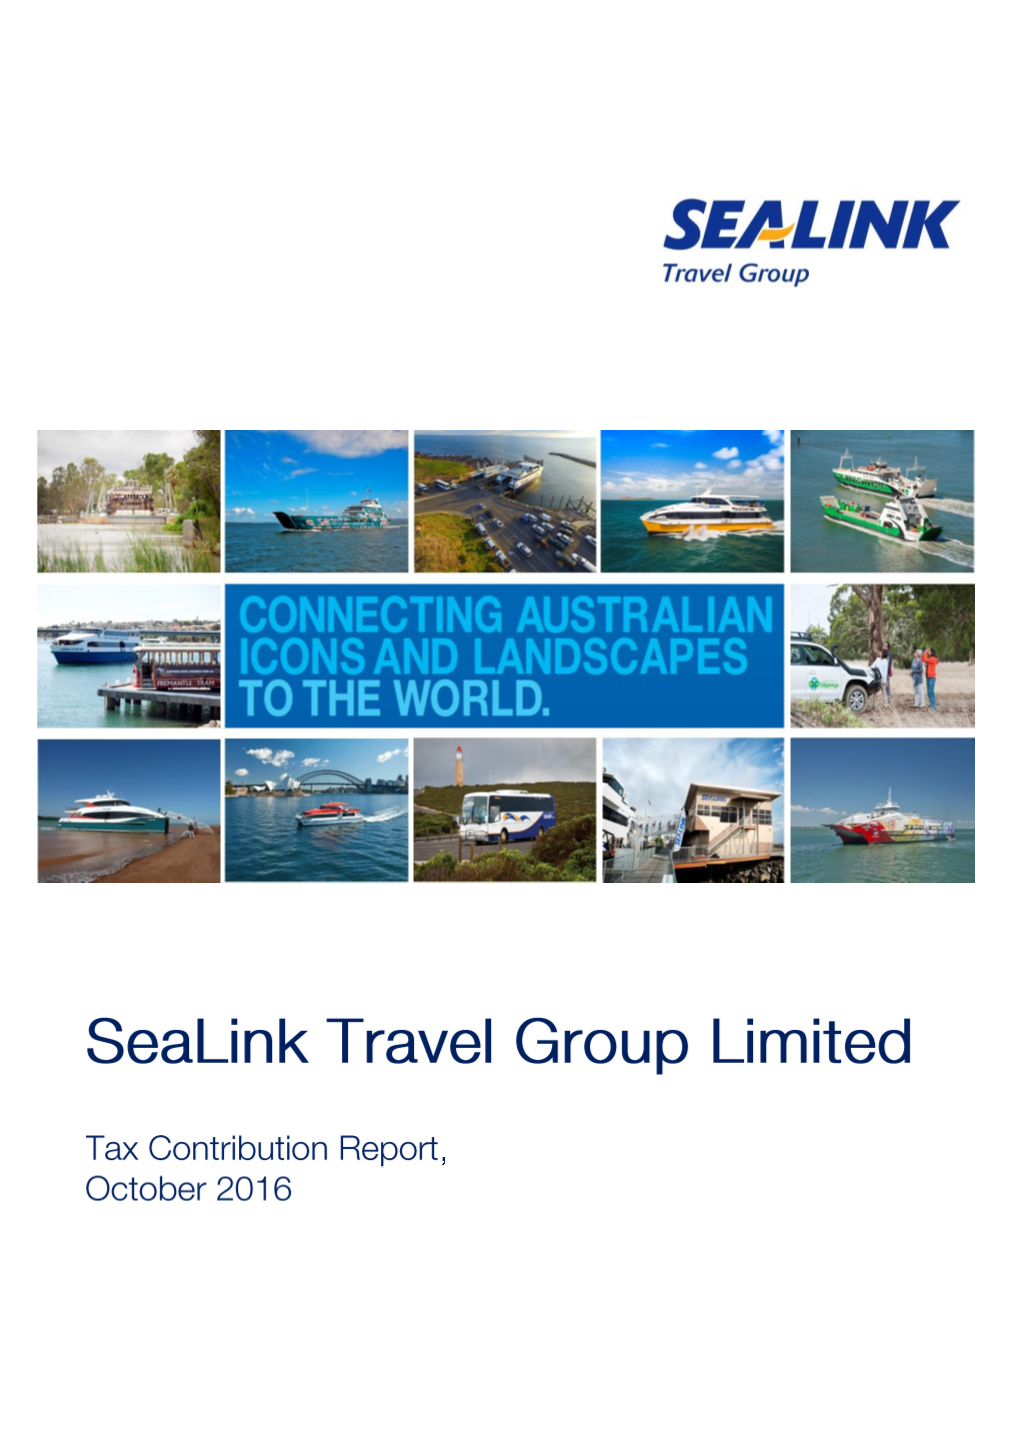 Sealink Travel Group Limited Tax Contribution Report October 2016